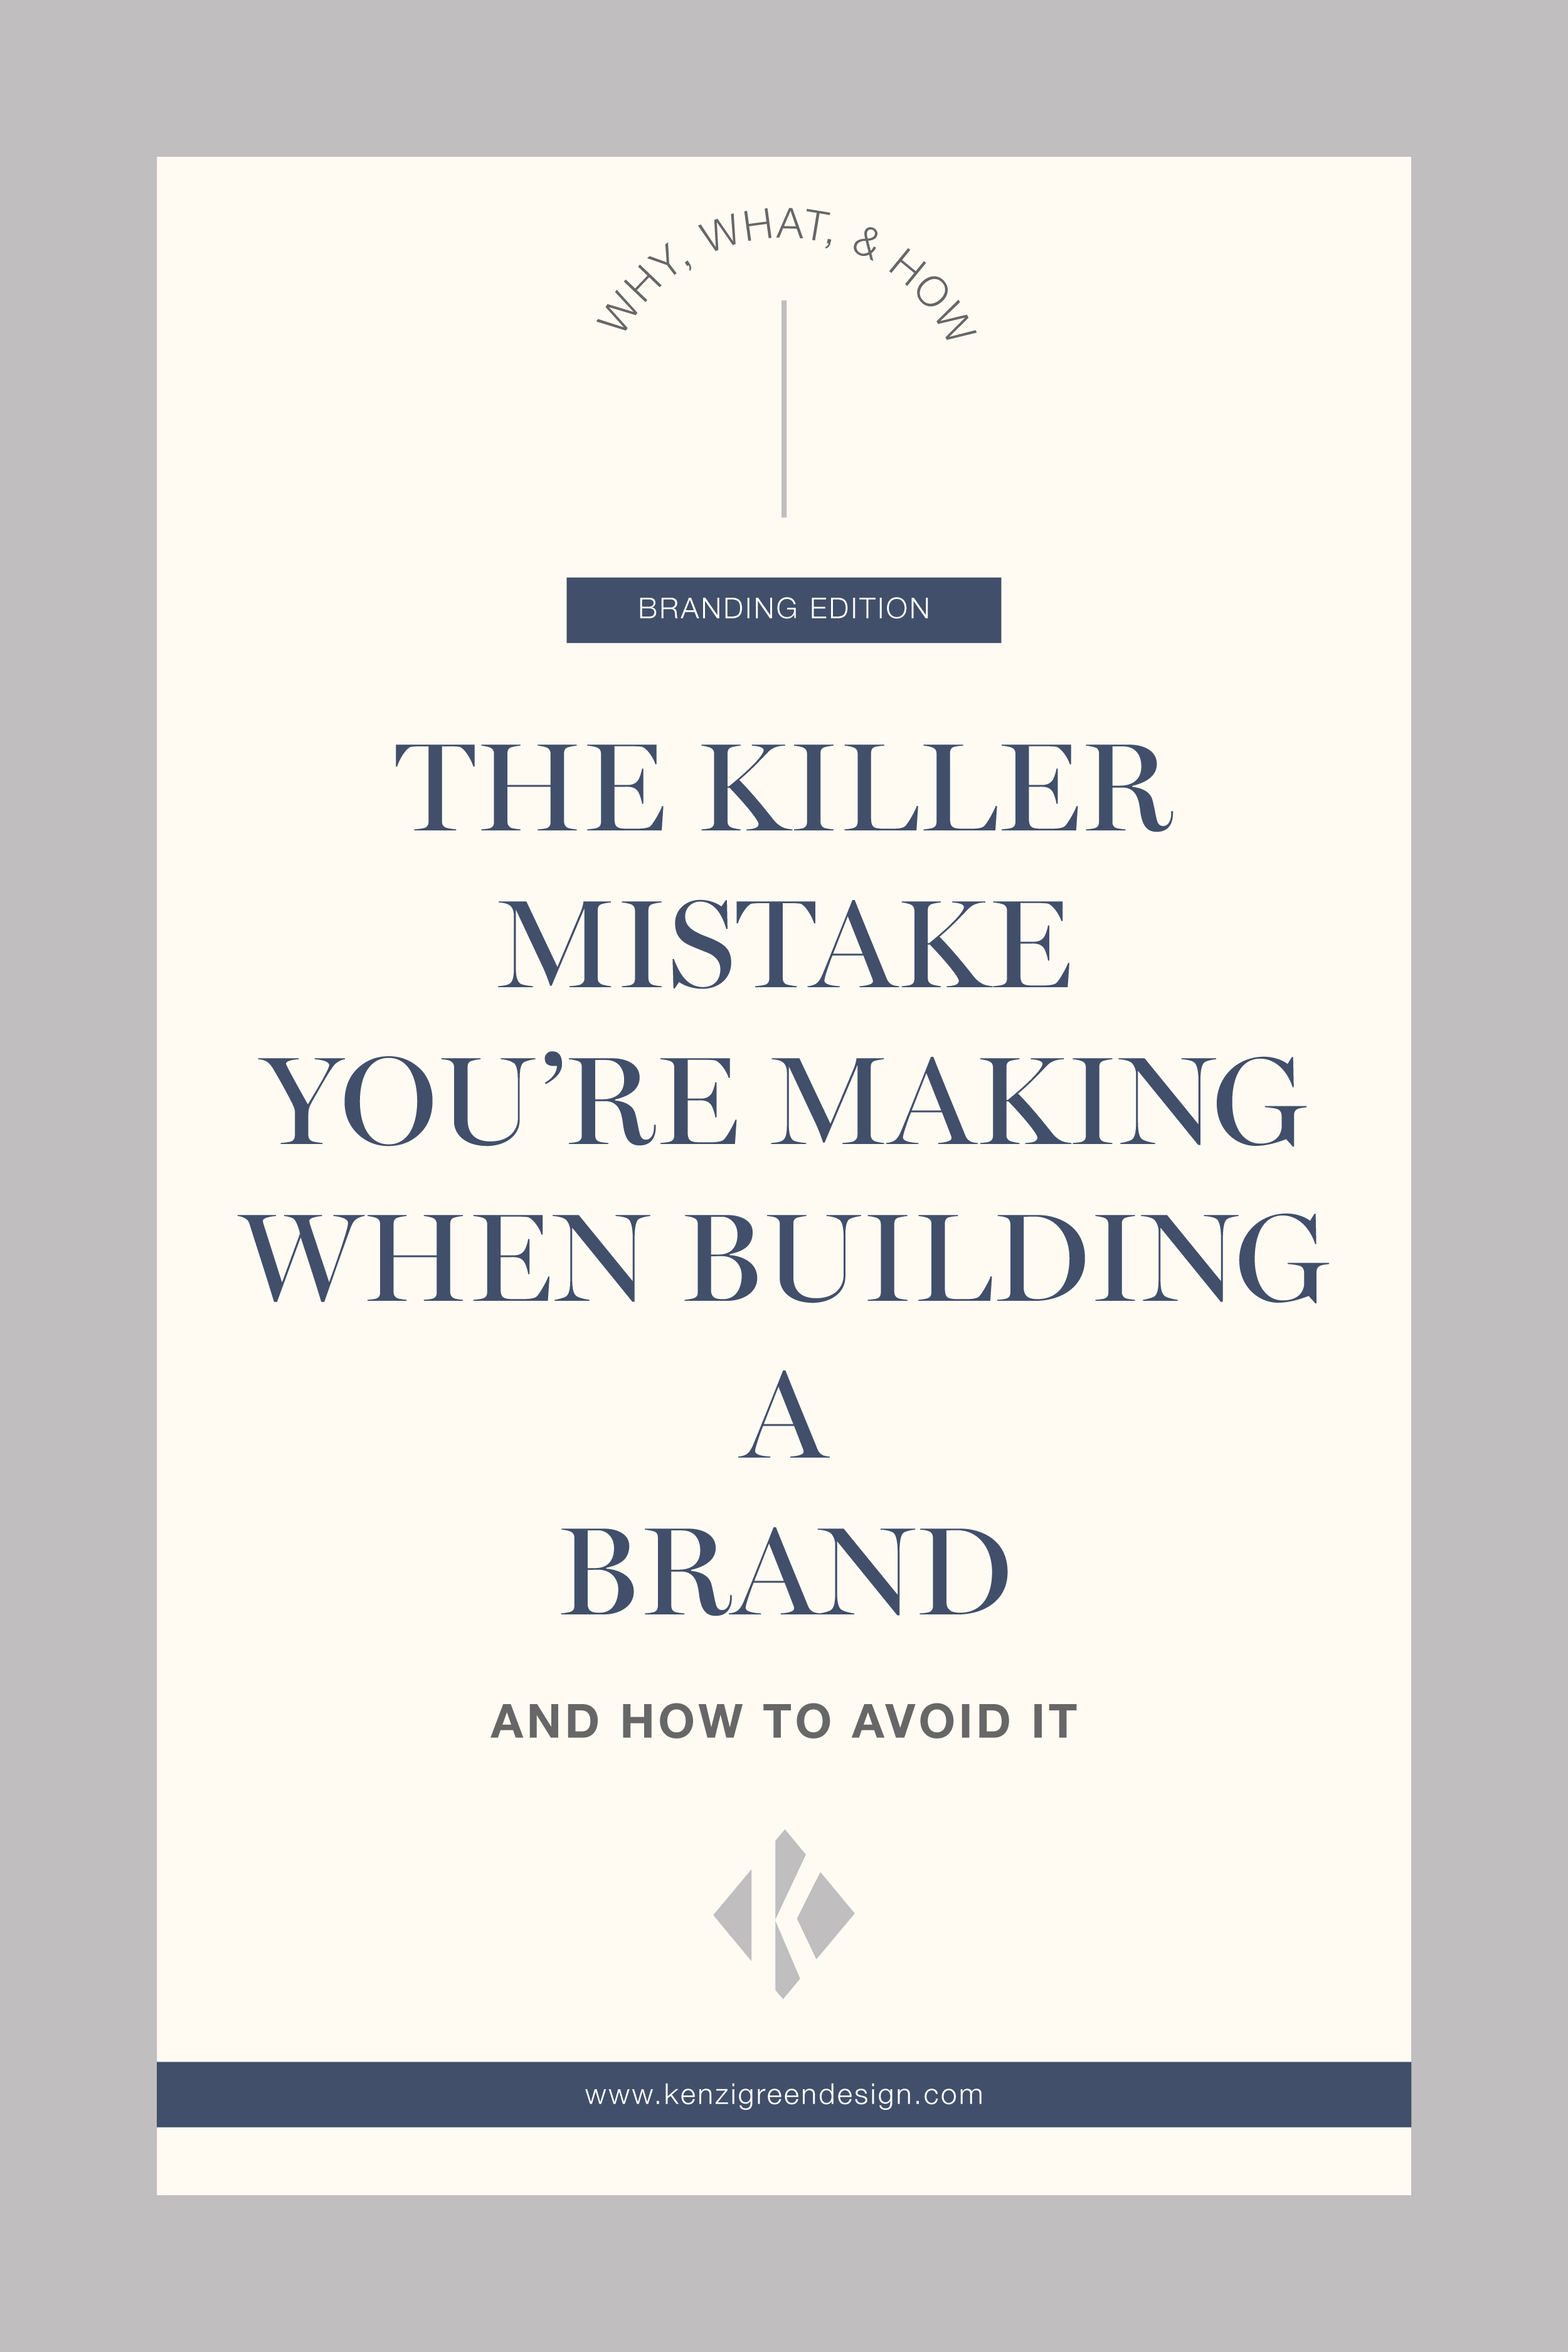 The Killer Mistake You're Making When Building A Brand